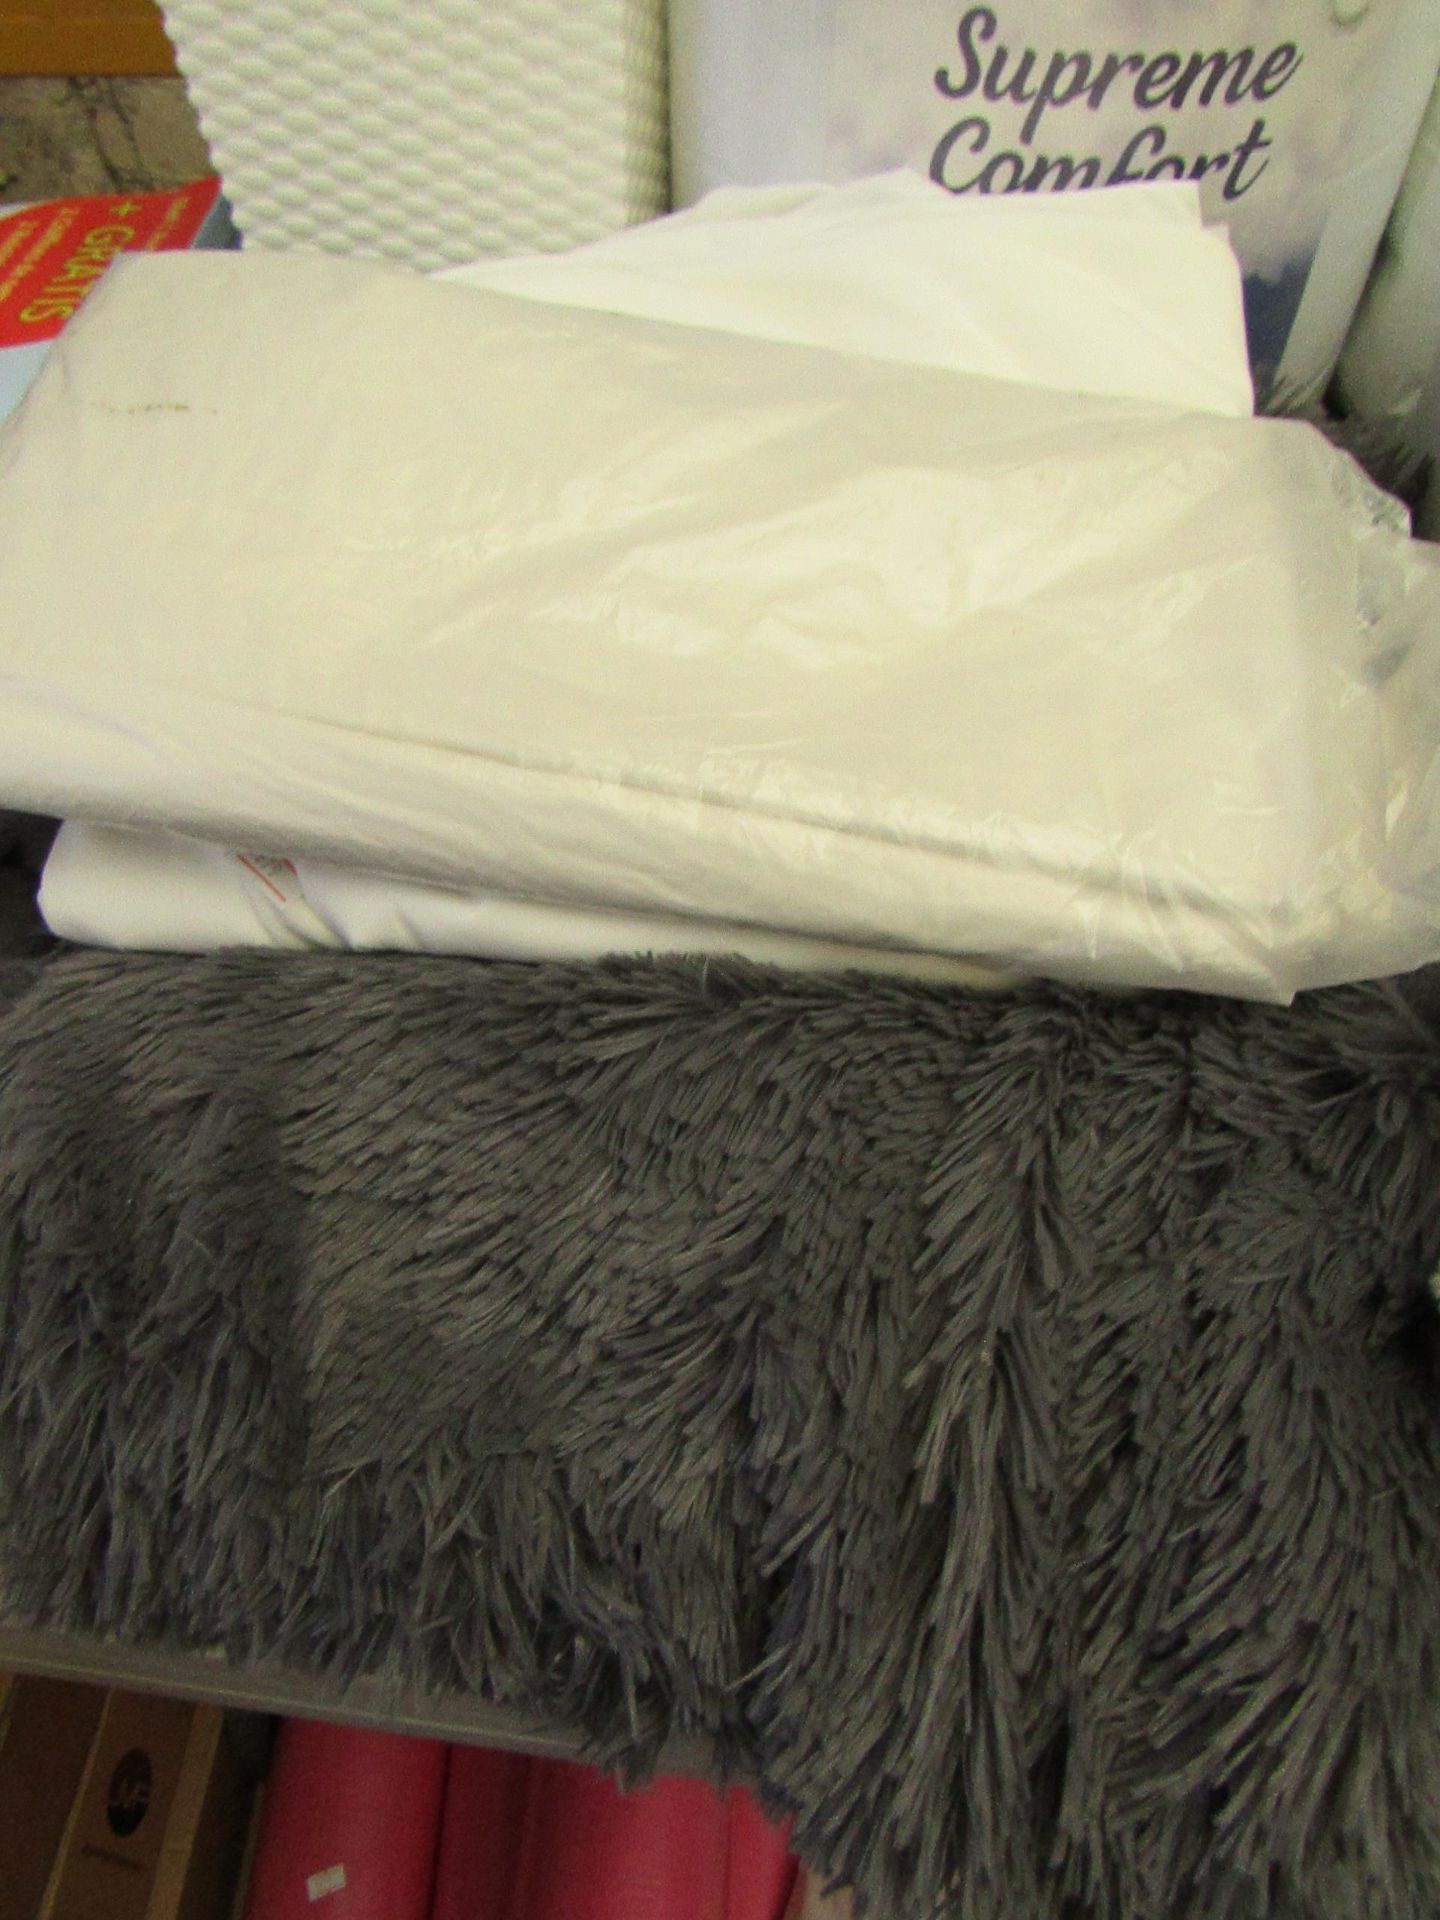 3 Items Being a Large Grey Throw & 2 x Large Piece of White Fabric